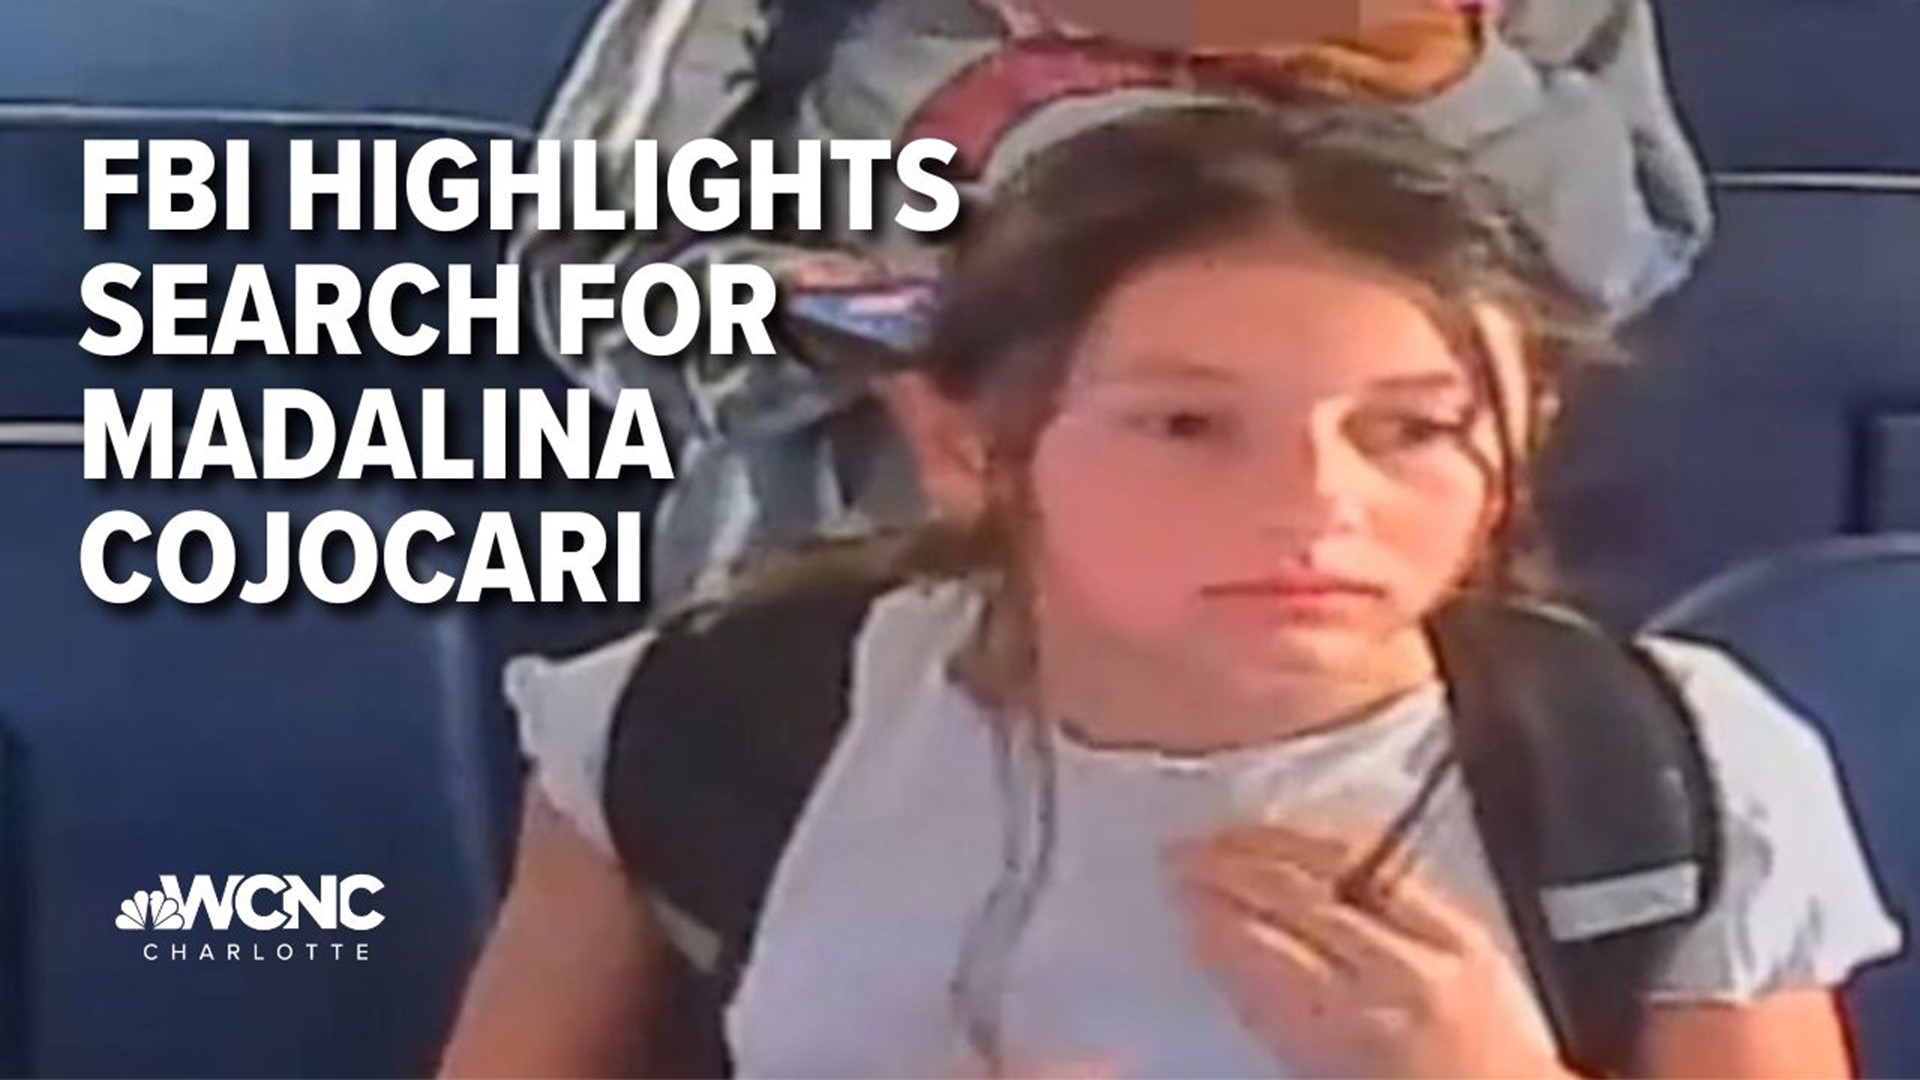 On National Missing Children's Day, the FBI Charlotte released a video outlining the details surrounding Madalina's disappearance.